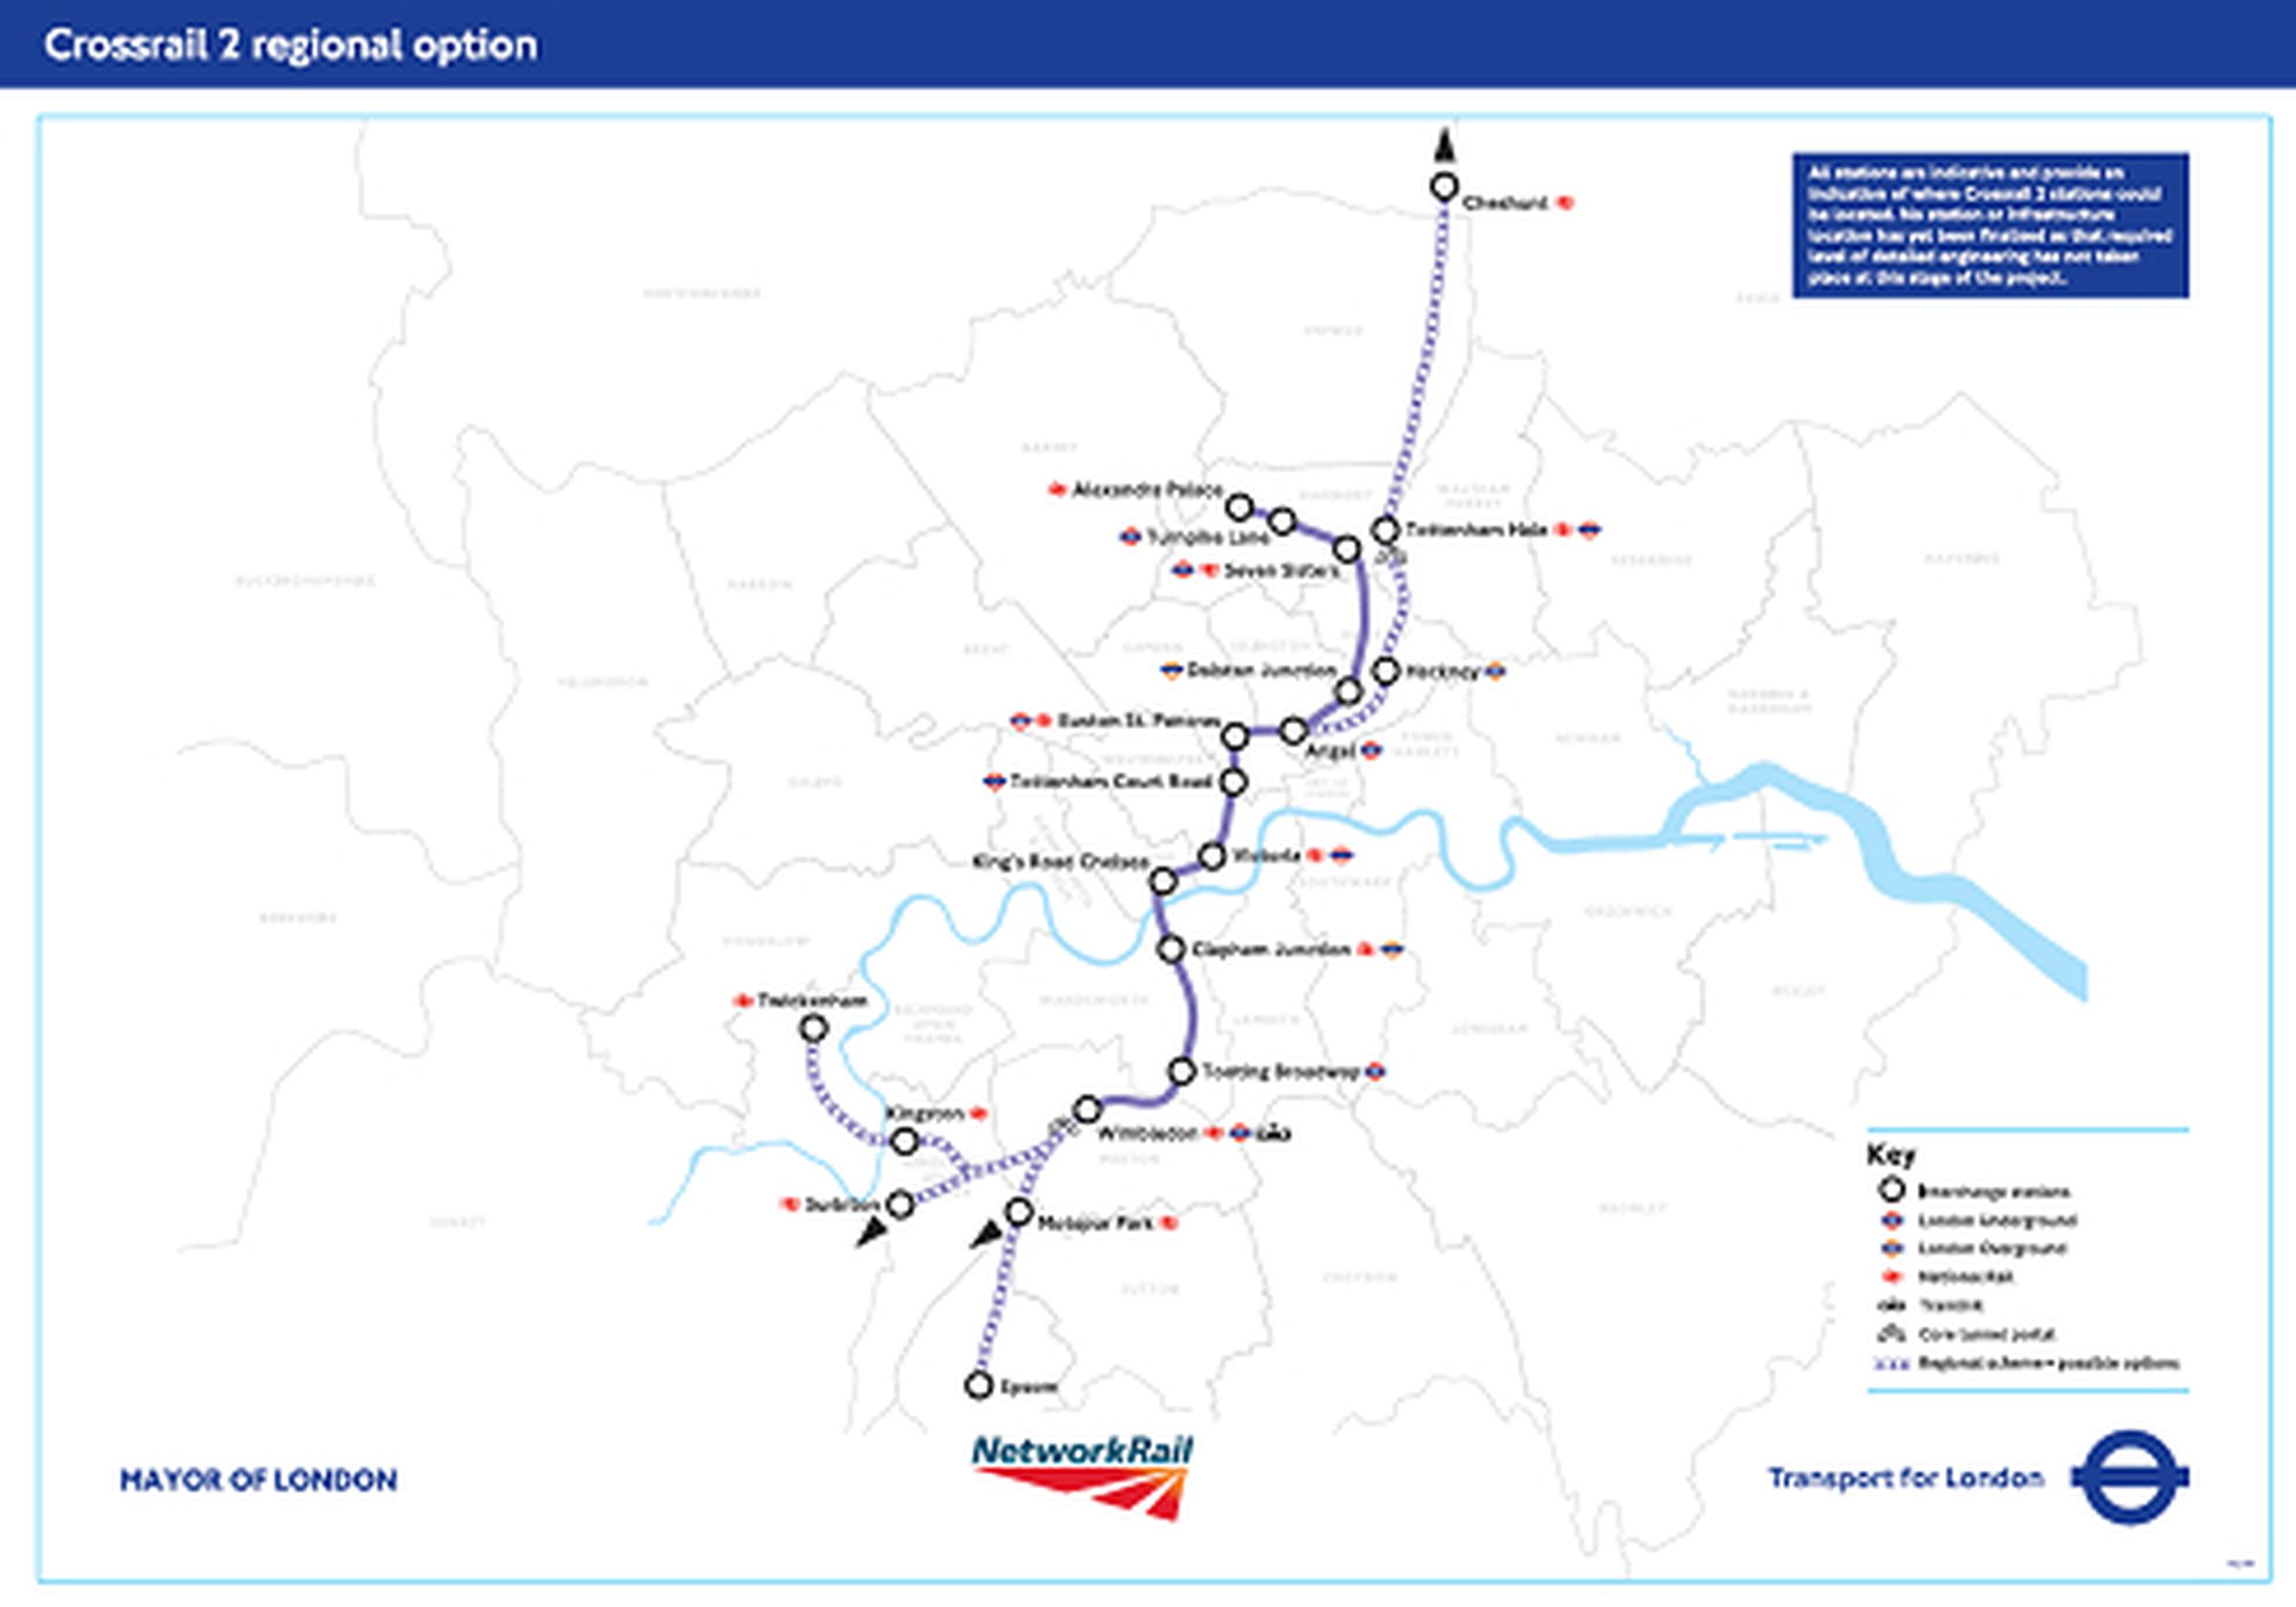 Crossrail 2 would add 10% extra capacity to the rail network at peak times, averting 